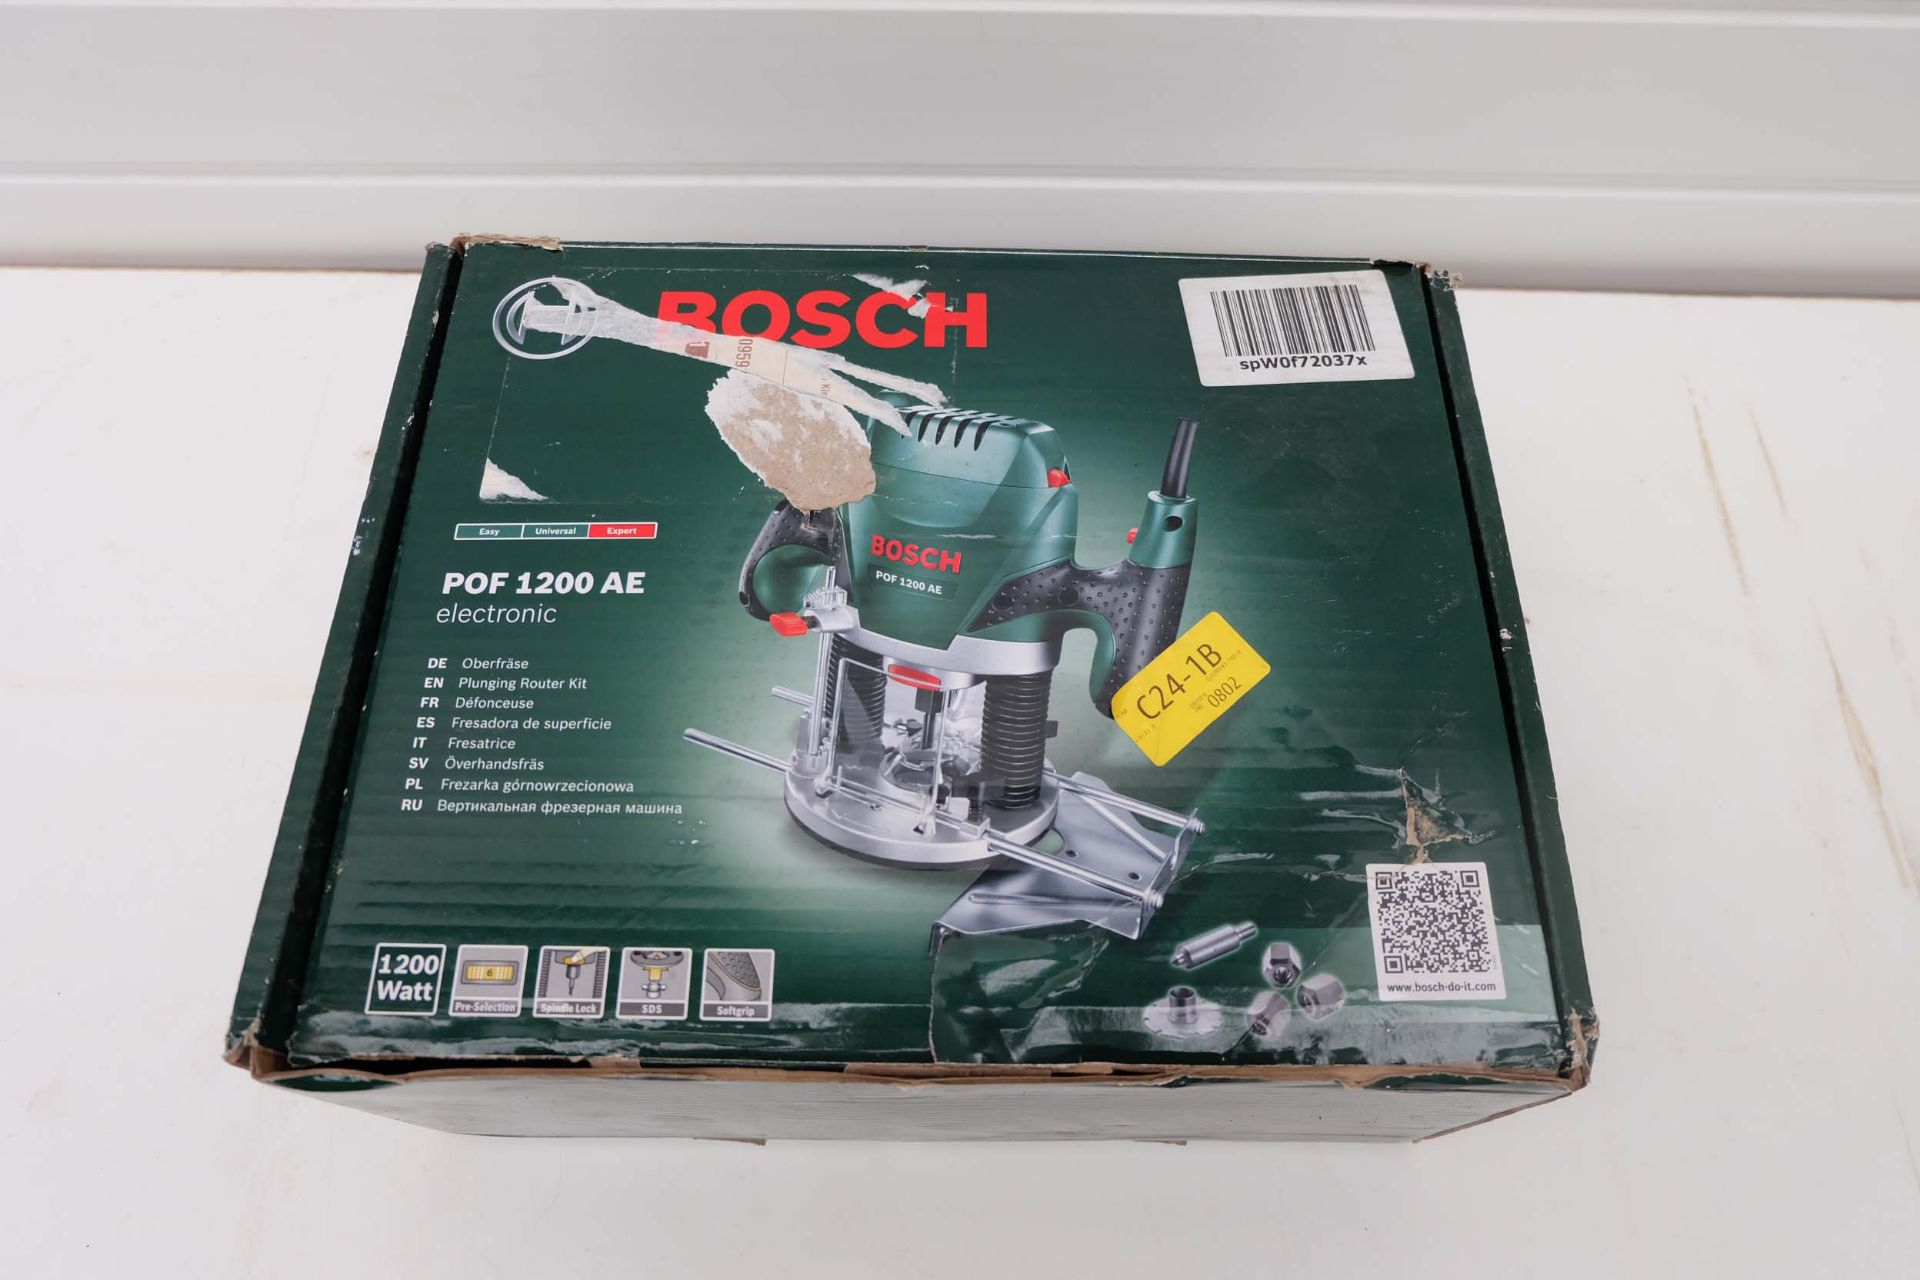 Bosch POF1200AE Electronic Plunging Router. 230V,1200W Motor. With Box of Bits. - Image 8 of 9